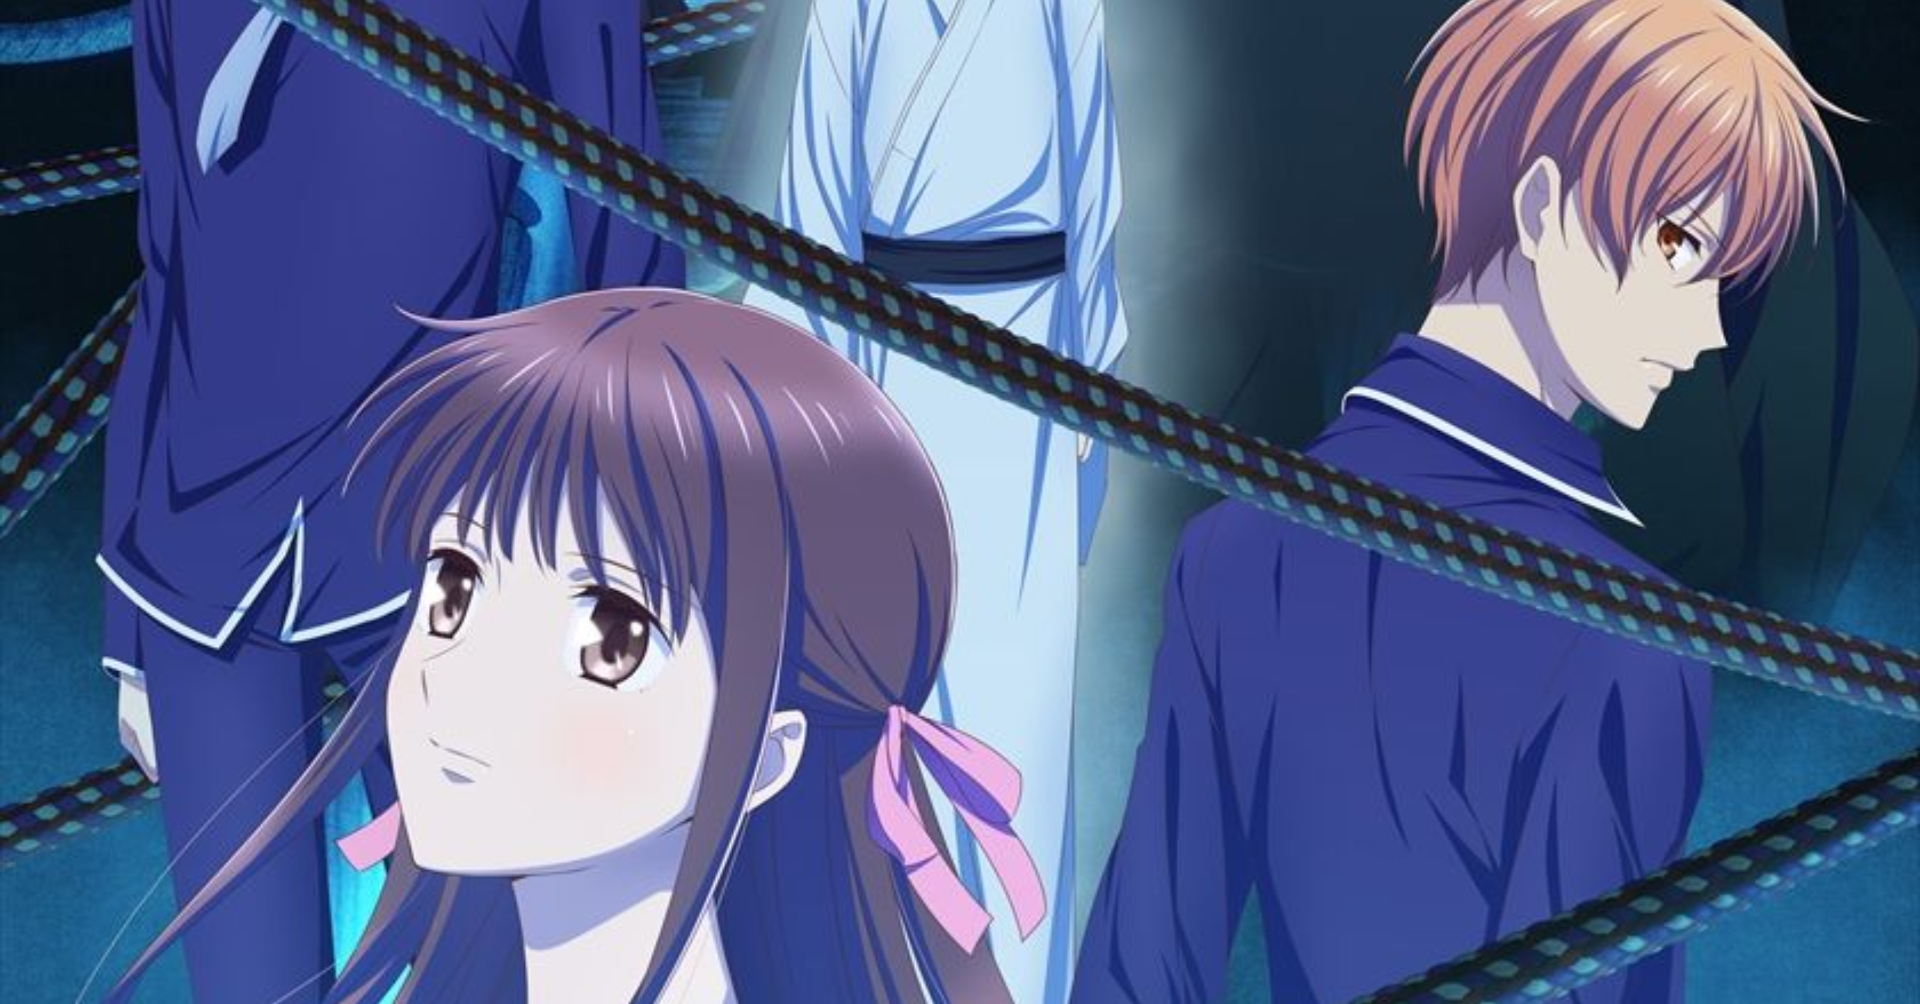 New Fruits Basket Anime to Debut in 2019, Staff and Visuals Revealed -  Crunchyroll News